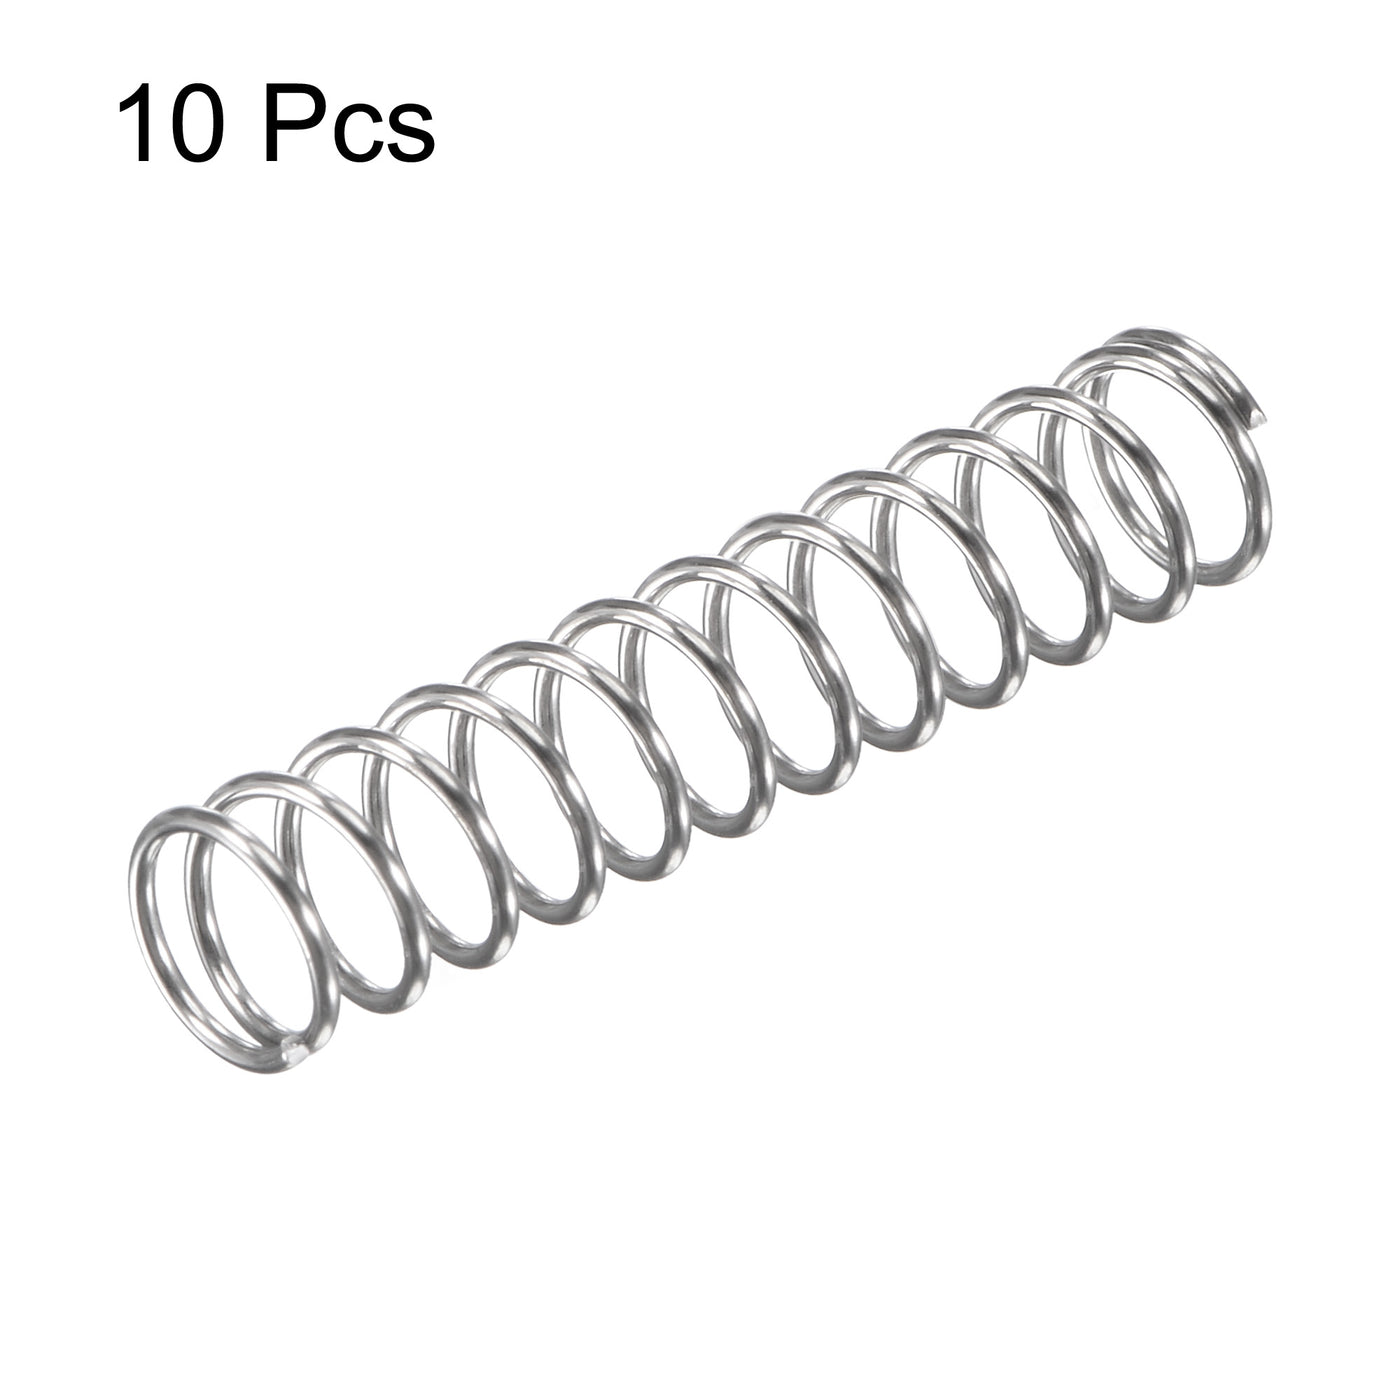 uxcell Uxcell 8mmx0.8mmx50mm 304 Stainless Steel Compression Spring 11.8N Load Capacity 10pcs